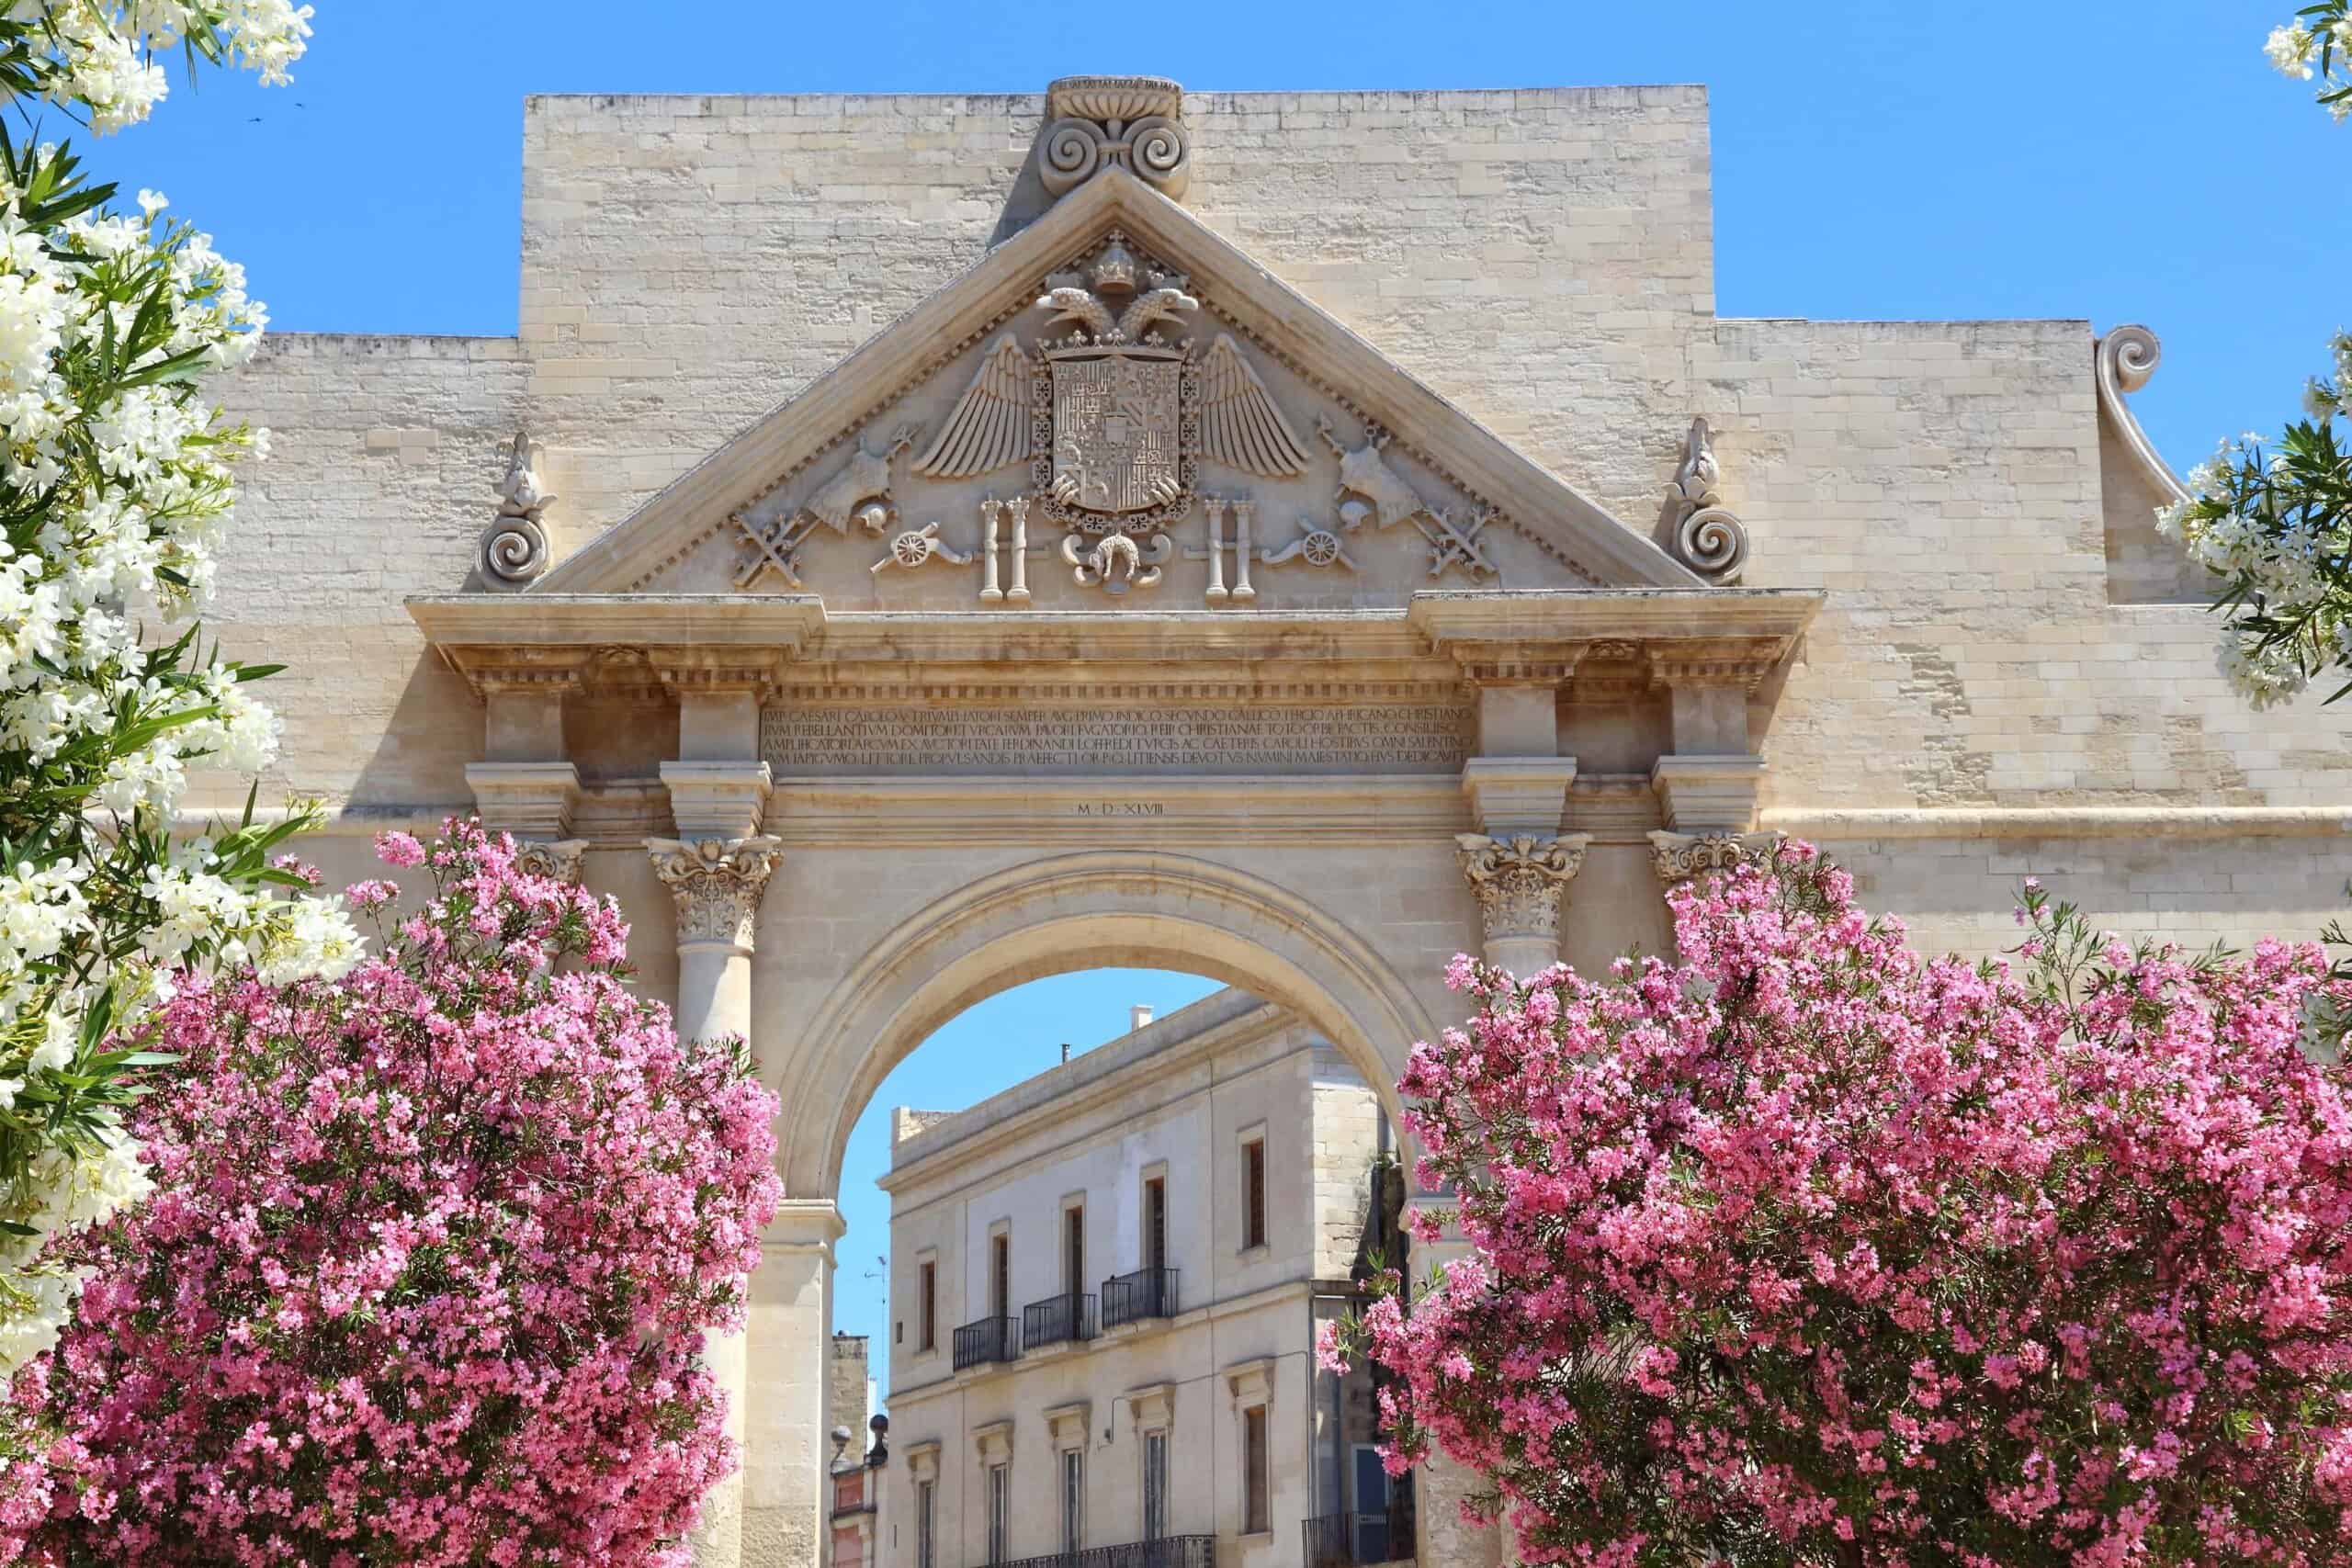 Gates of the city of Lecce framed by two trees with pink flowers in bloom.